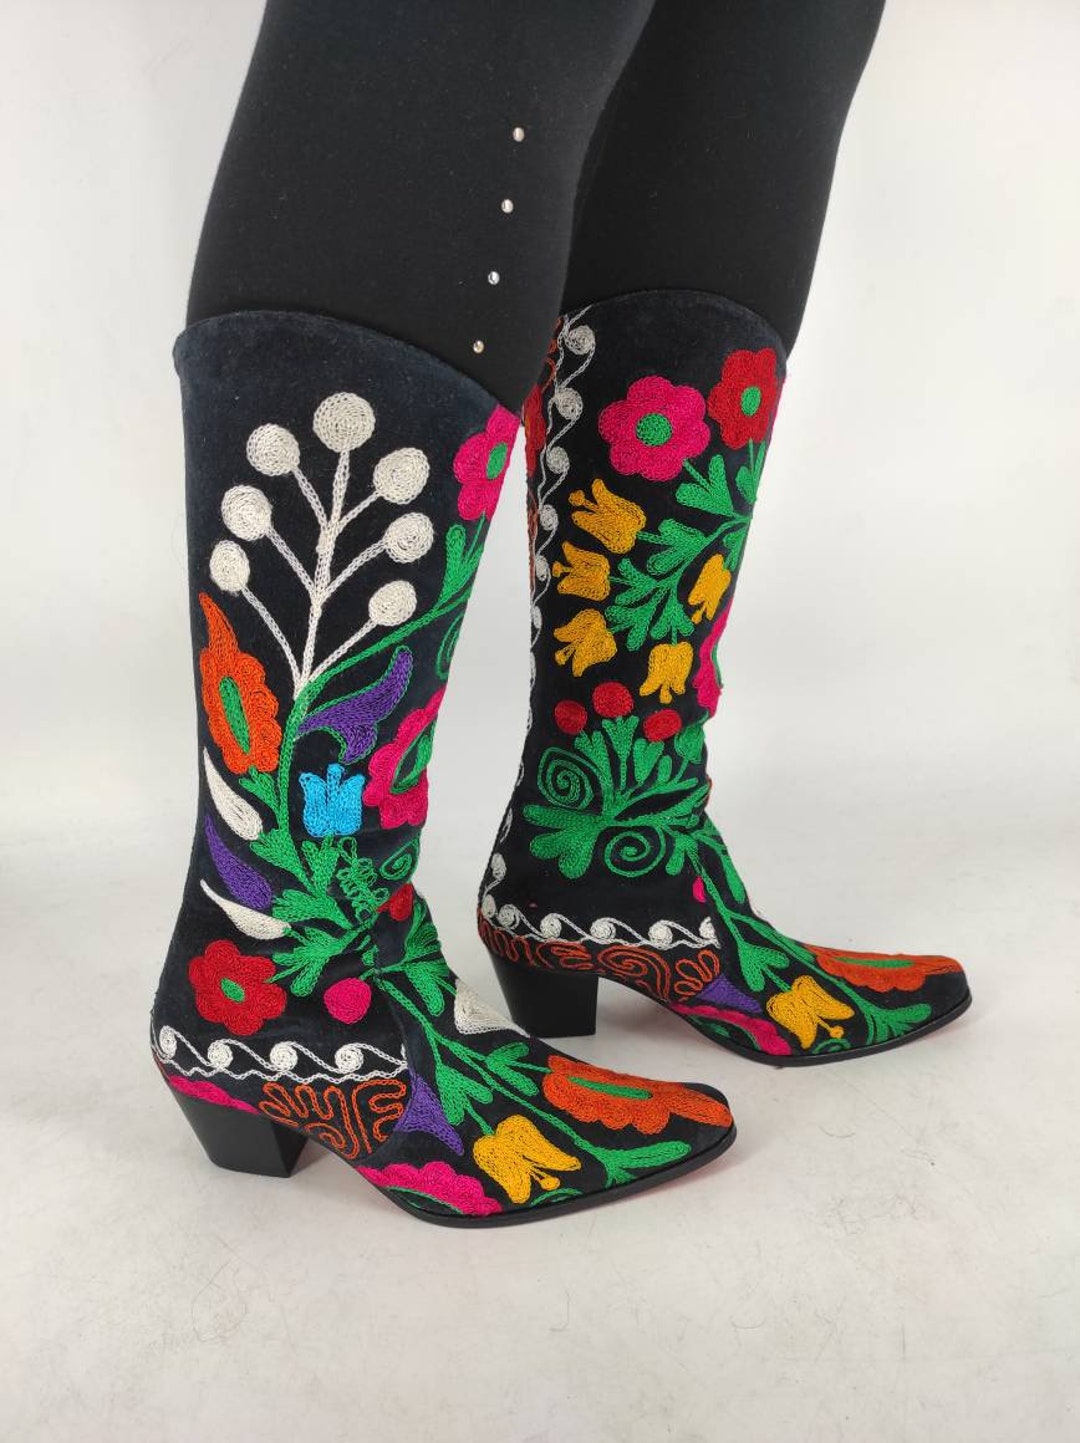 Vintage Embroidered Women's Boots, Suzani Boots, Cowboy Style, for Her ...